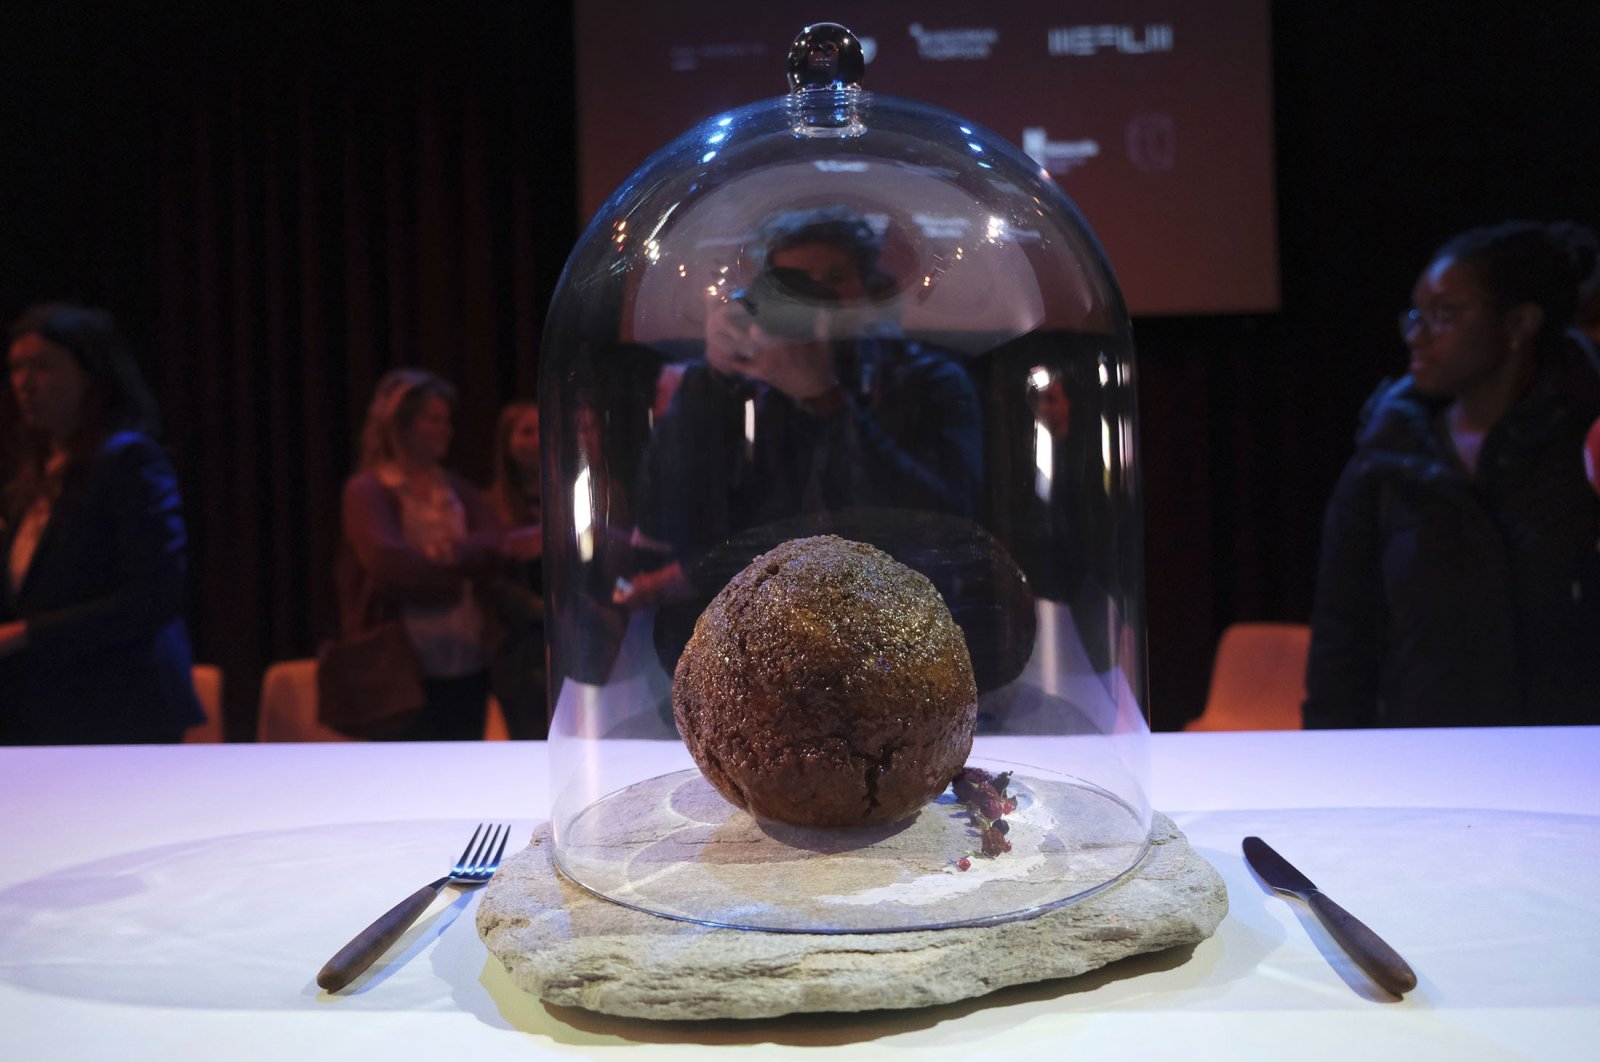 A meatball made using genetic code from a mammoth at the Nemo science museum in Amsterdam, The Netherlands, March 28, 2023. (AP Photo)